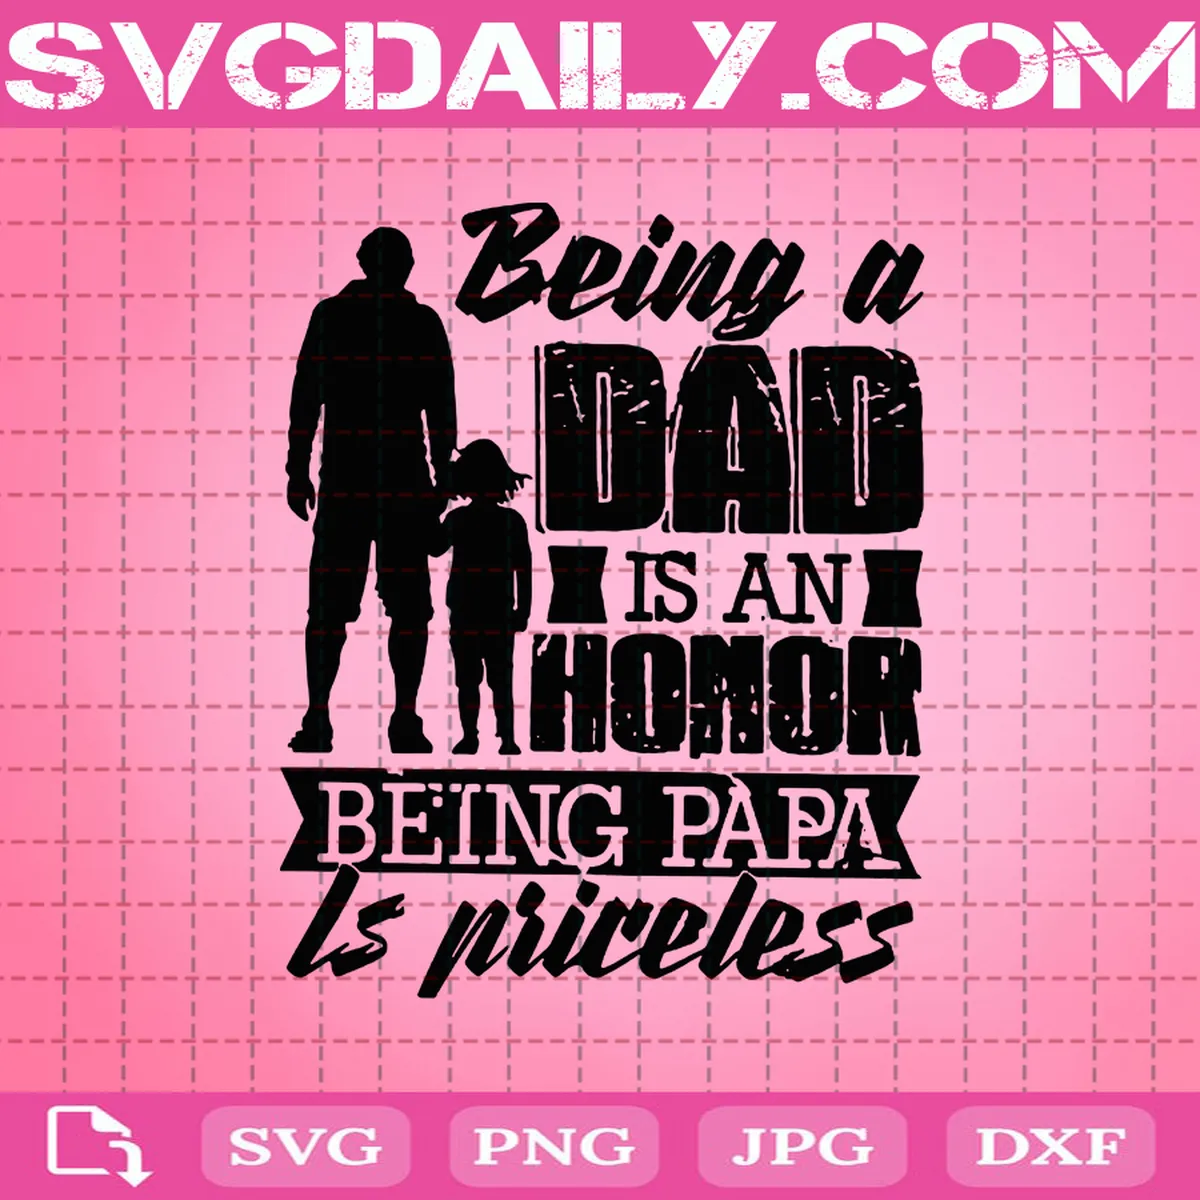 Being A Dad Is An Honor Being Papa Is Priceless Svg, Dad Svg, Being Papa Is Priceless Svg, Papa Svg, Father's Day Svg